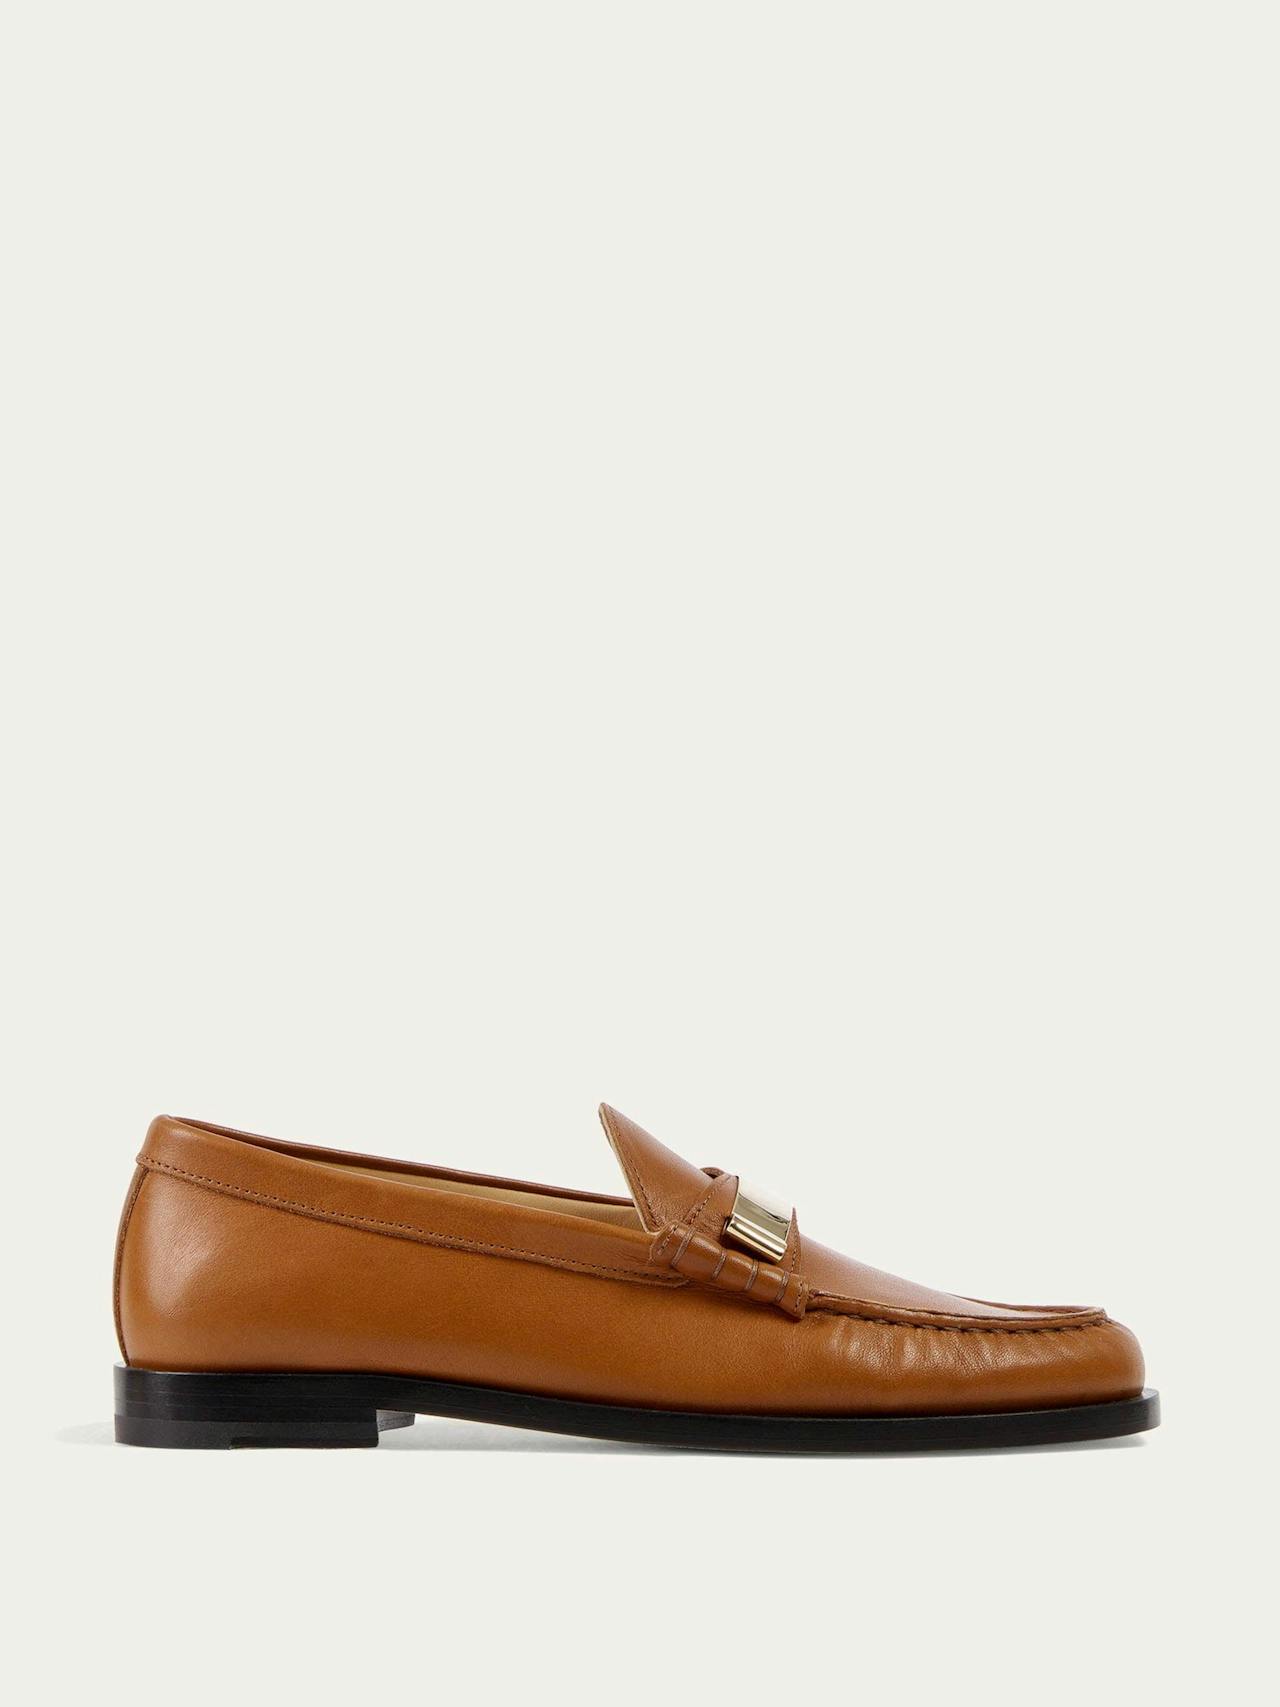 Saddle patent Luca loafers